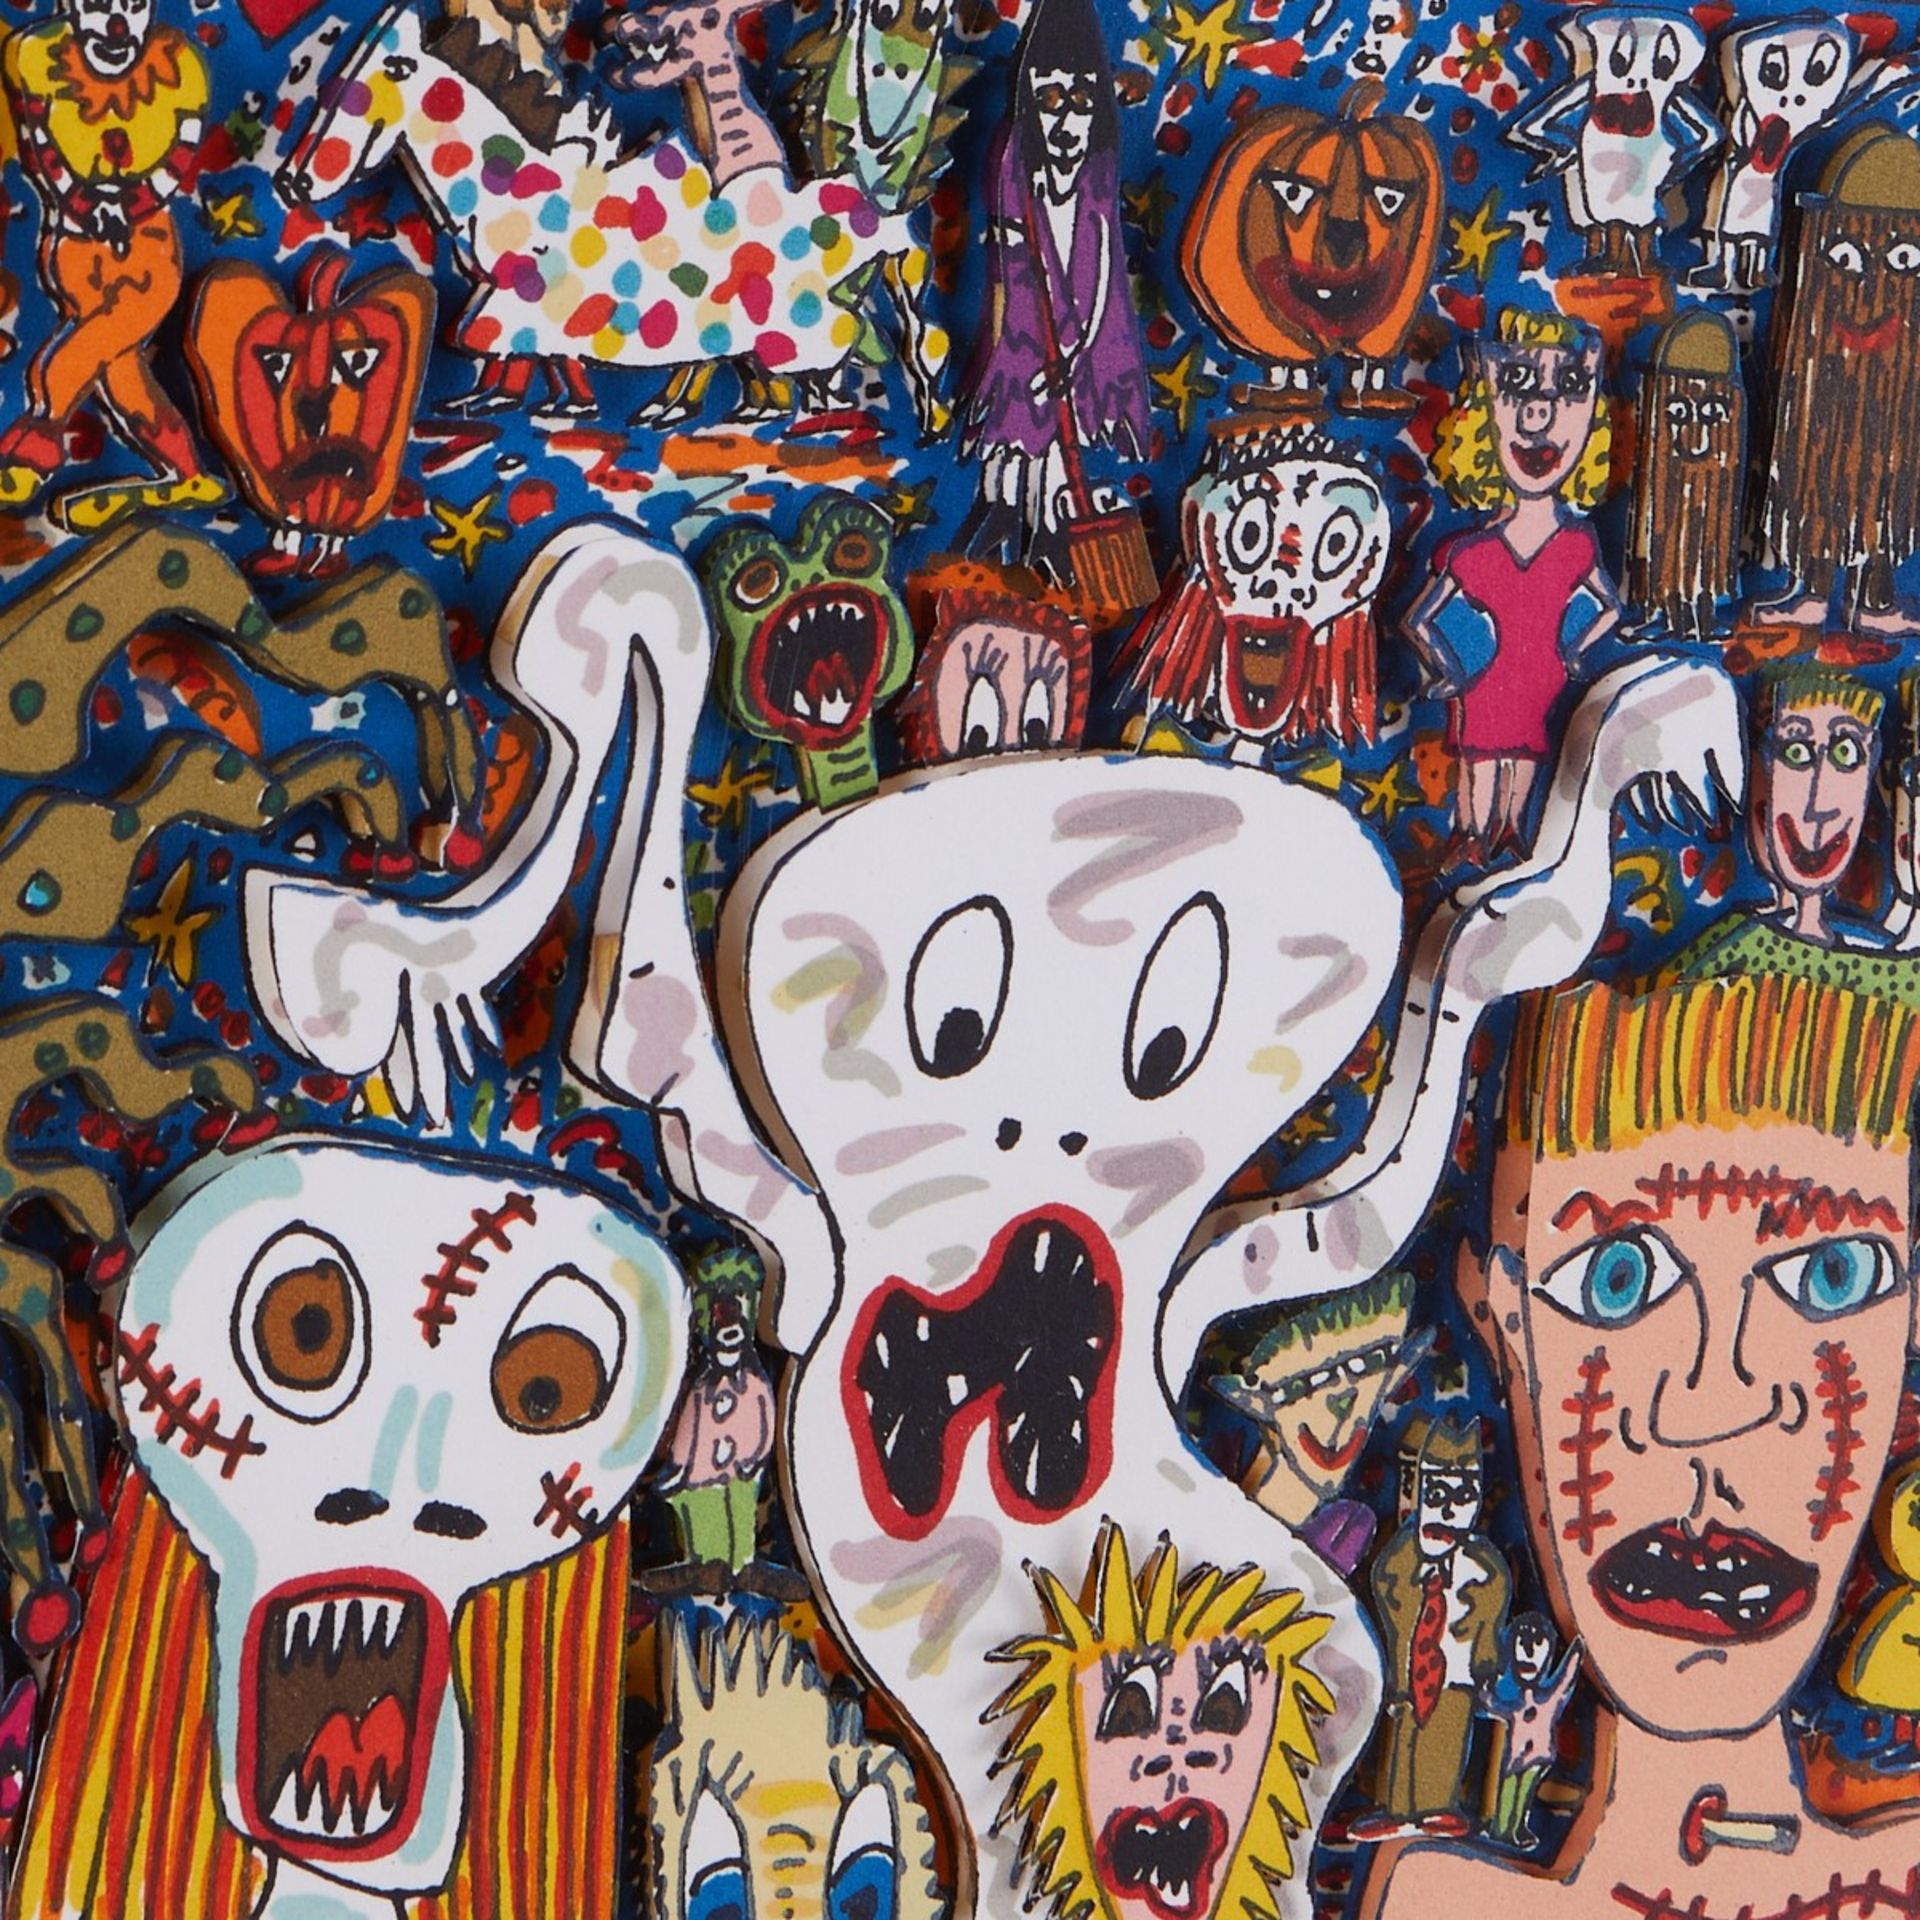 James Rizzi "Trick or Treat" Mixed Media Collage - Image 6 of 6